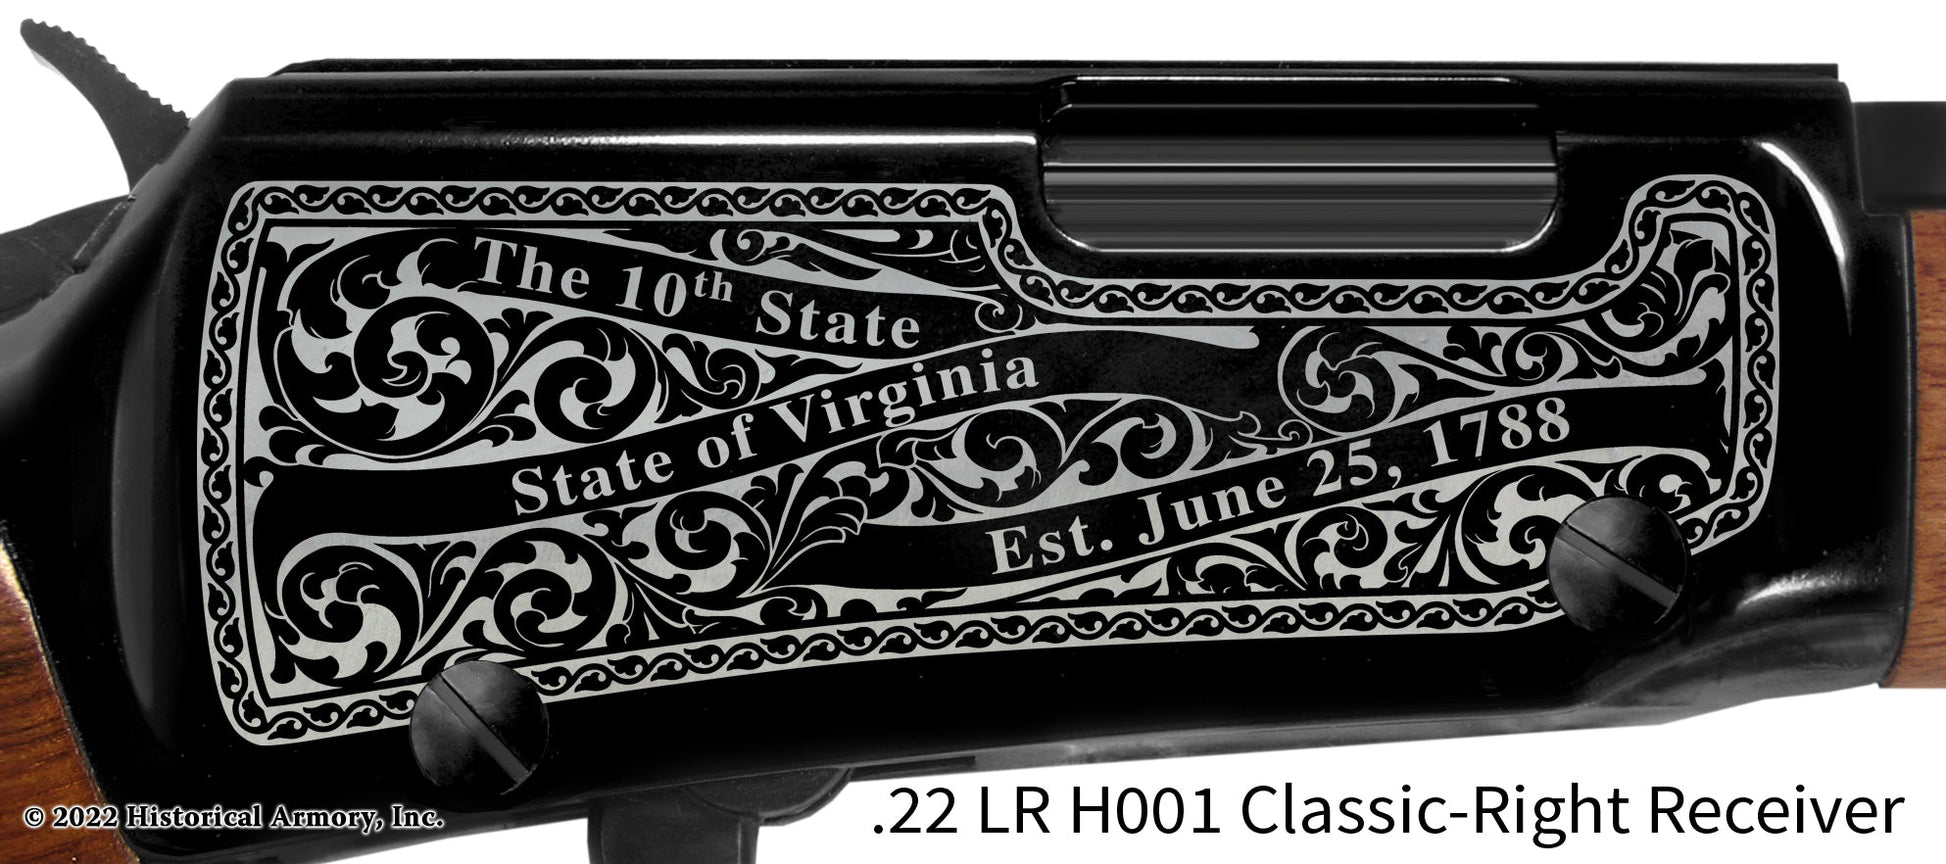 Campbell County Virginia Engraved Henry H001 Rifle